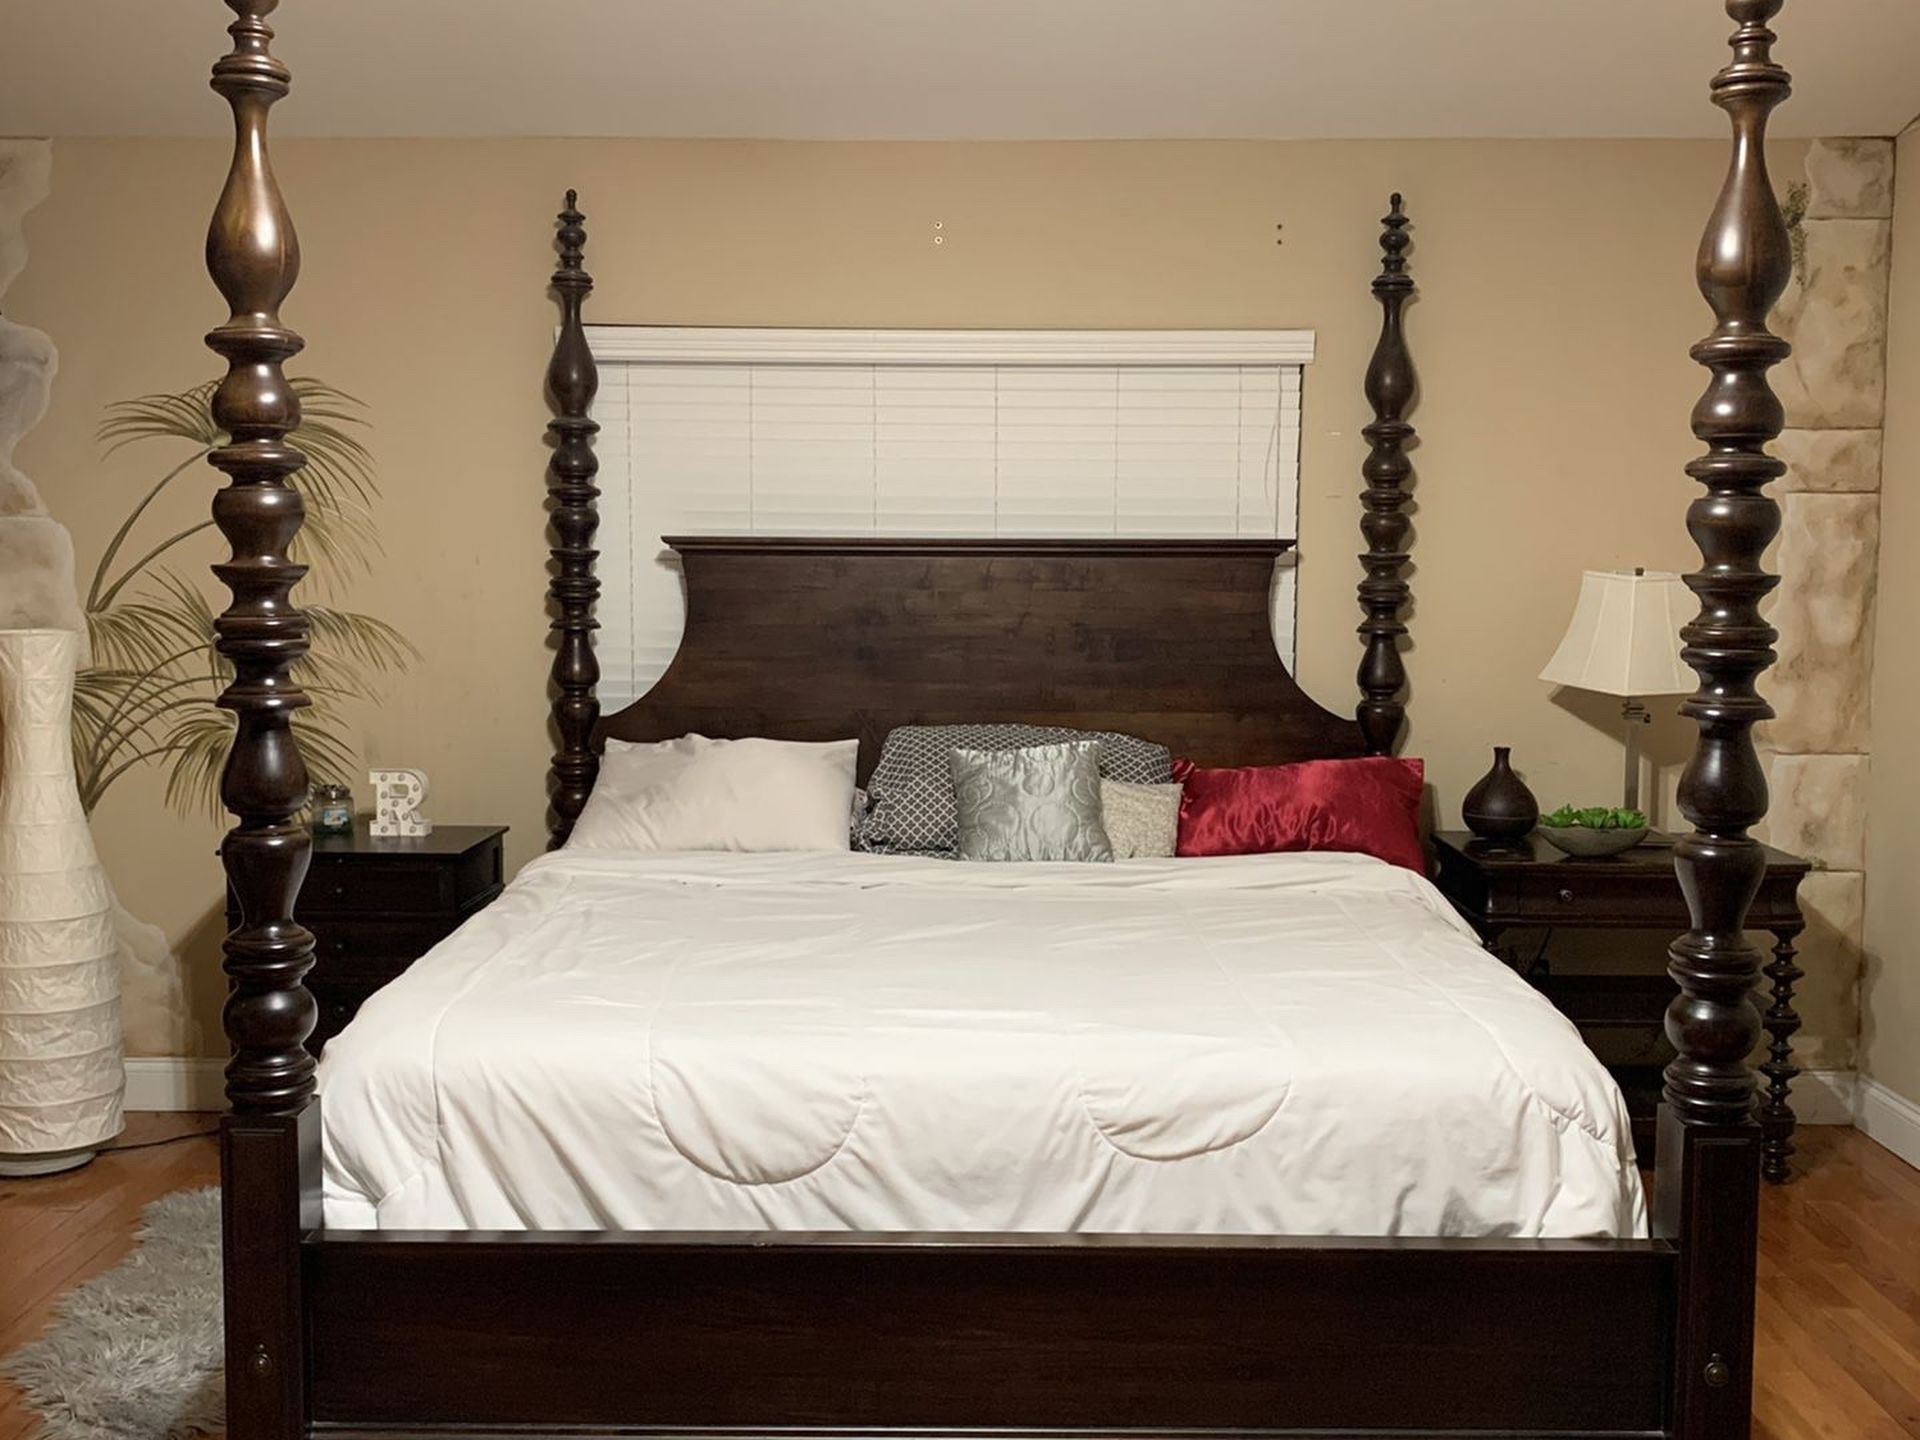 King Size Bed With End Tables “Ethan Allen” Solid Wood